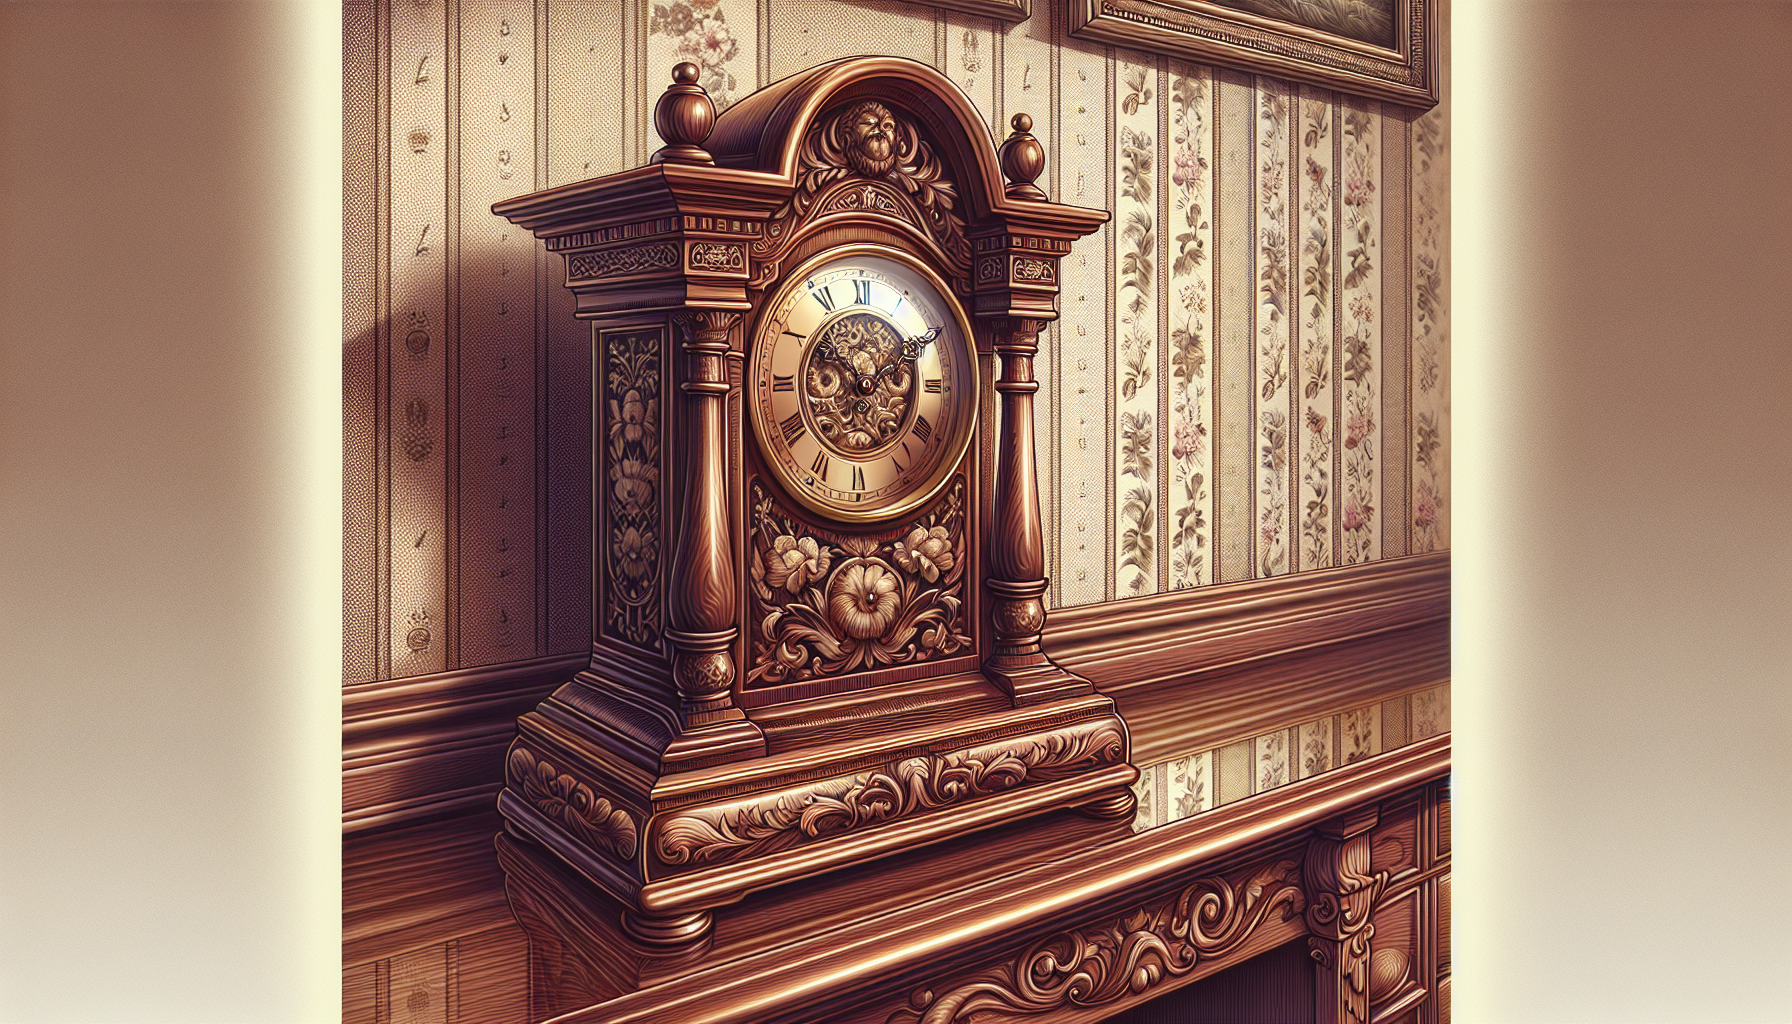 A vintage mantel clock placed on a wooden shelf